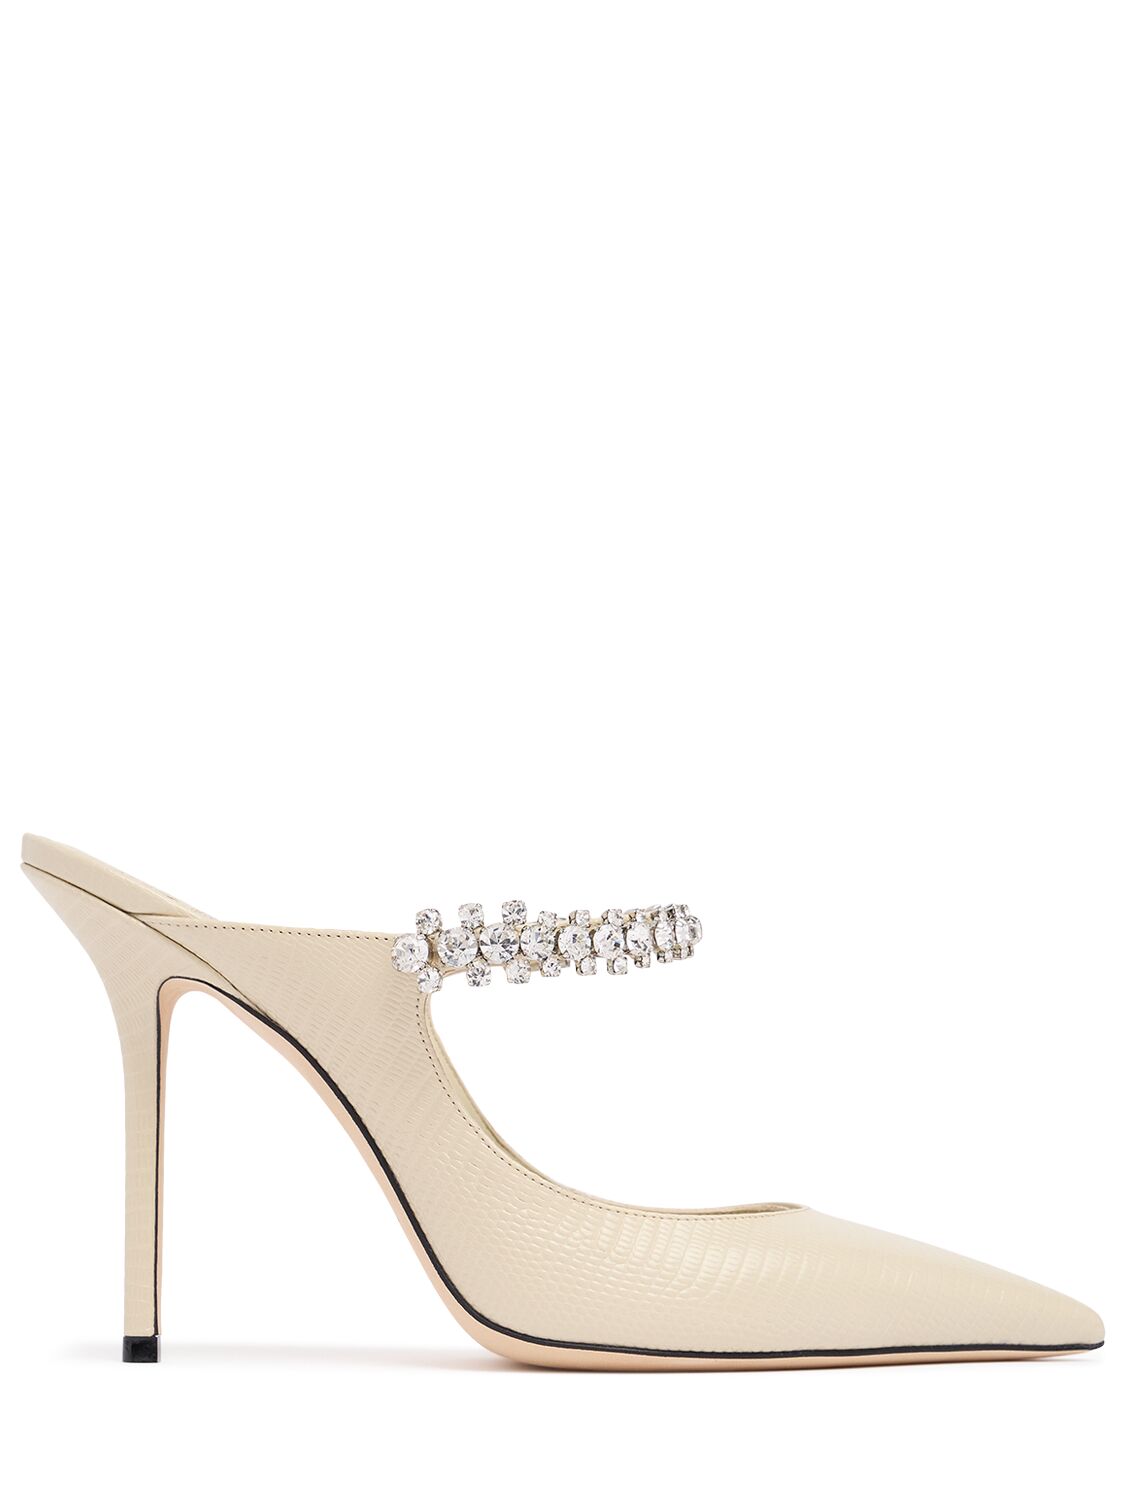 Jimmy Choo 100mm Bling Embellished Pumps In Off White